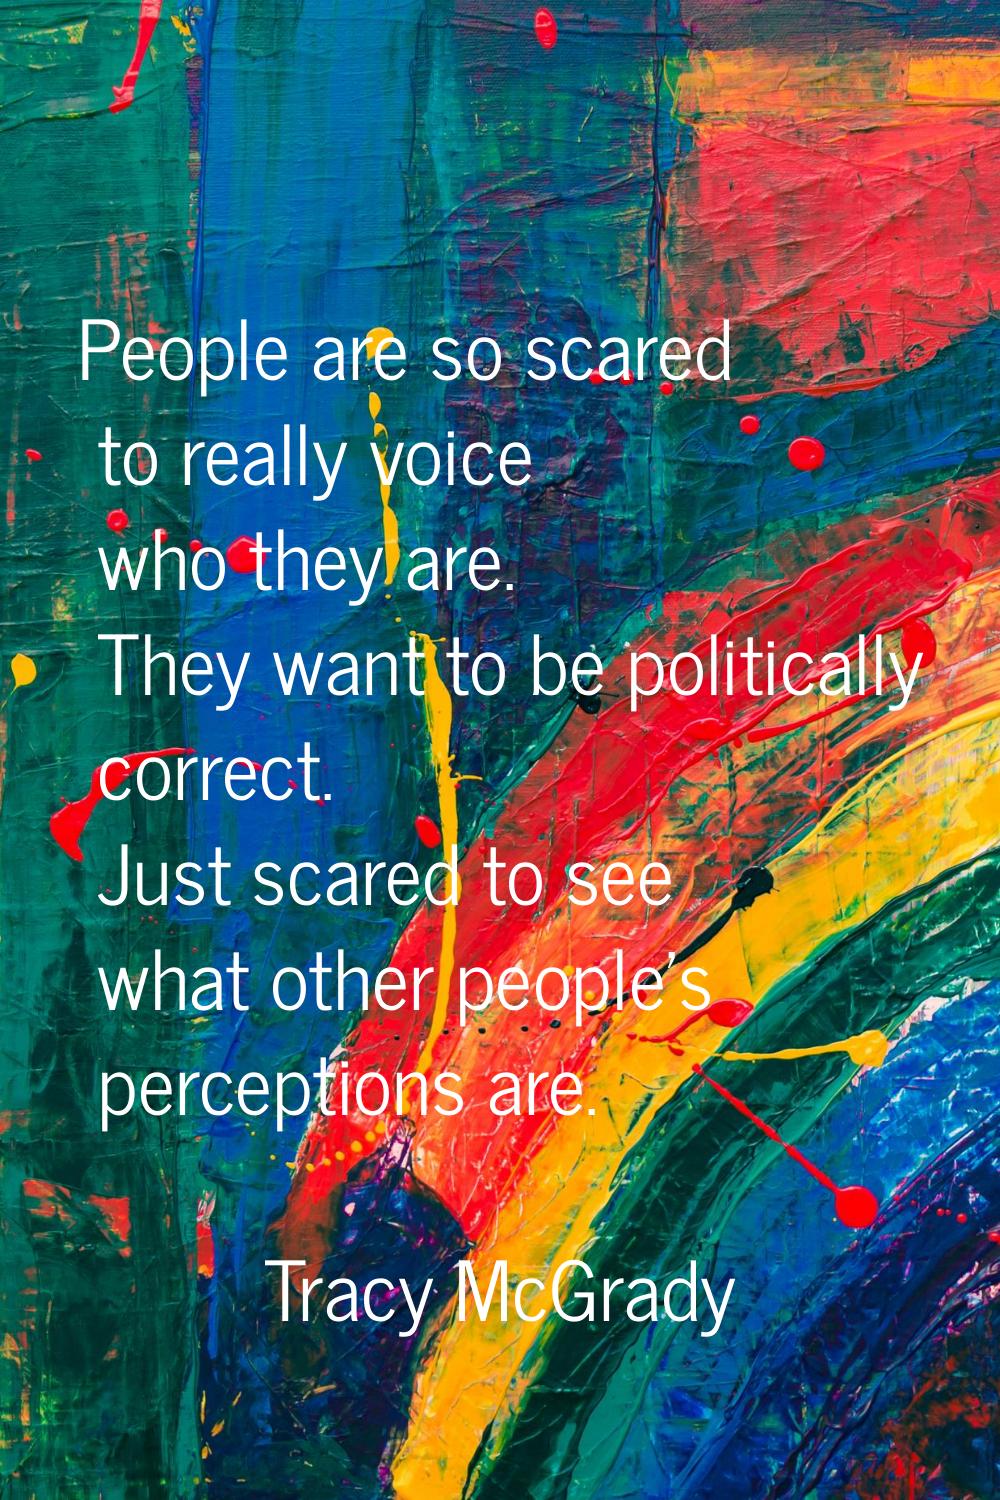 People are so scared to really voice who they are. They want to be politically correct. Just scared